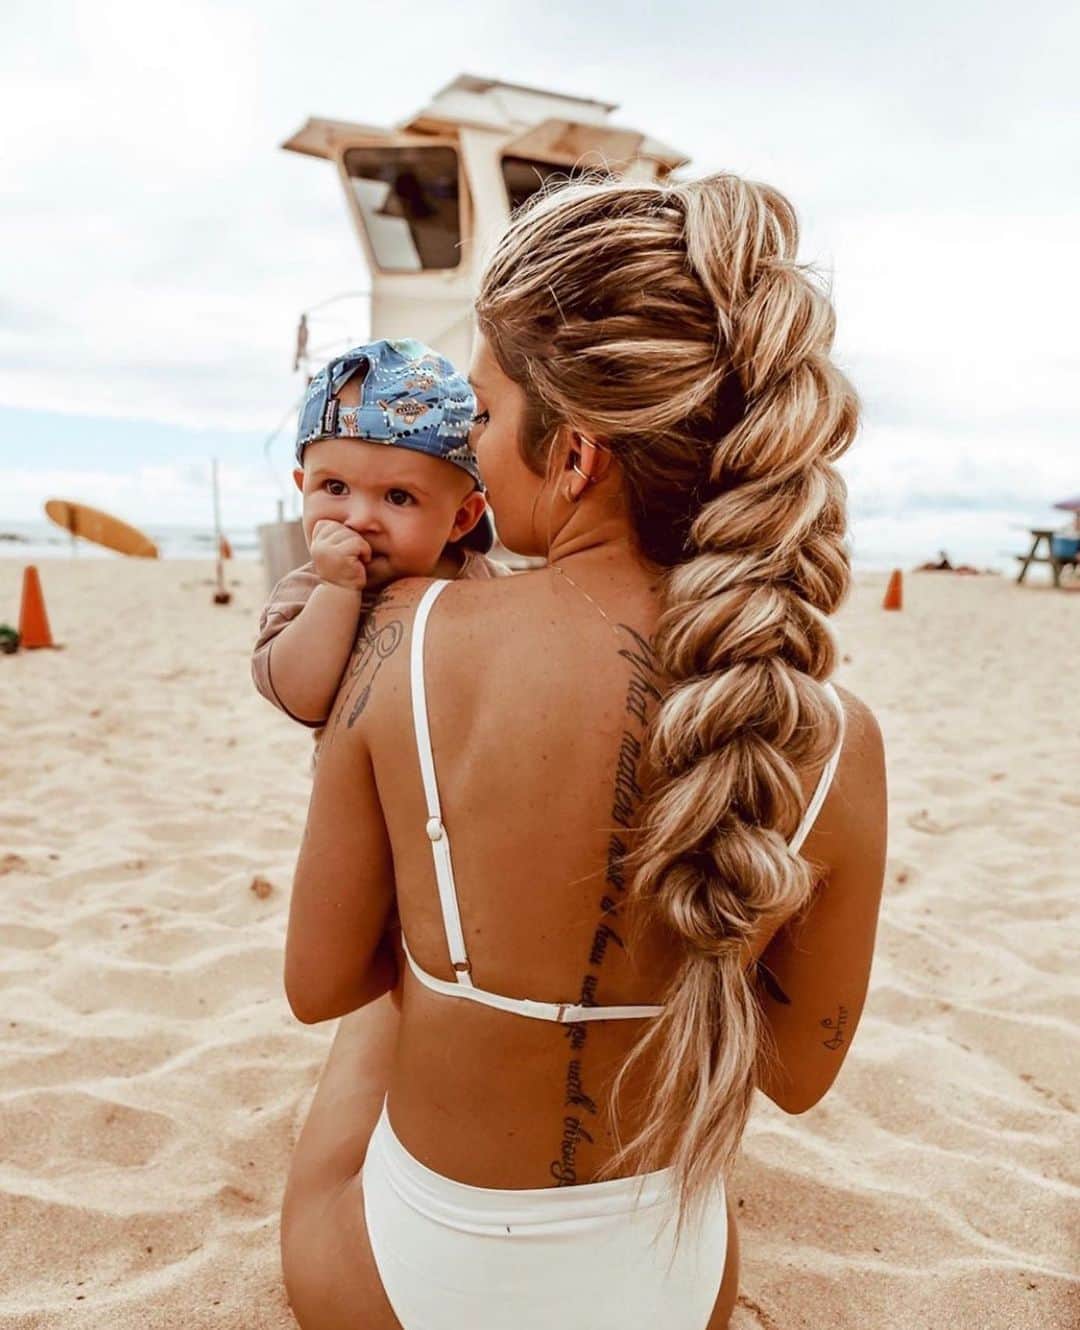 I N S T A B R A I Dのインスタグラム：「Summer coming to an end and already missing the beach🏖😩. #hair #braid #cute #hairaccessory #instagram #fashion #trendy #hairstyles #hairstylist #hairnyc #beyondtheponytail #blogger #beach #summer」